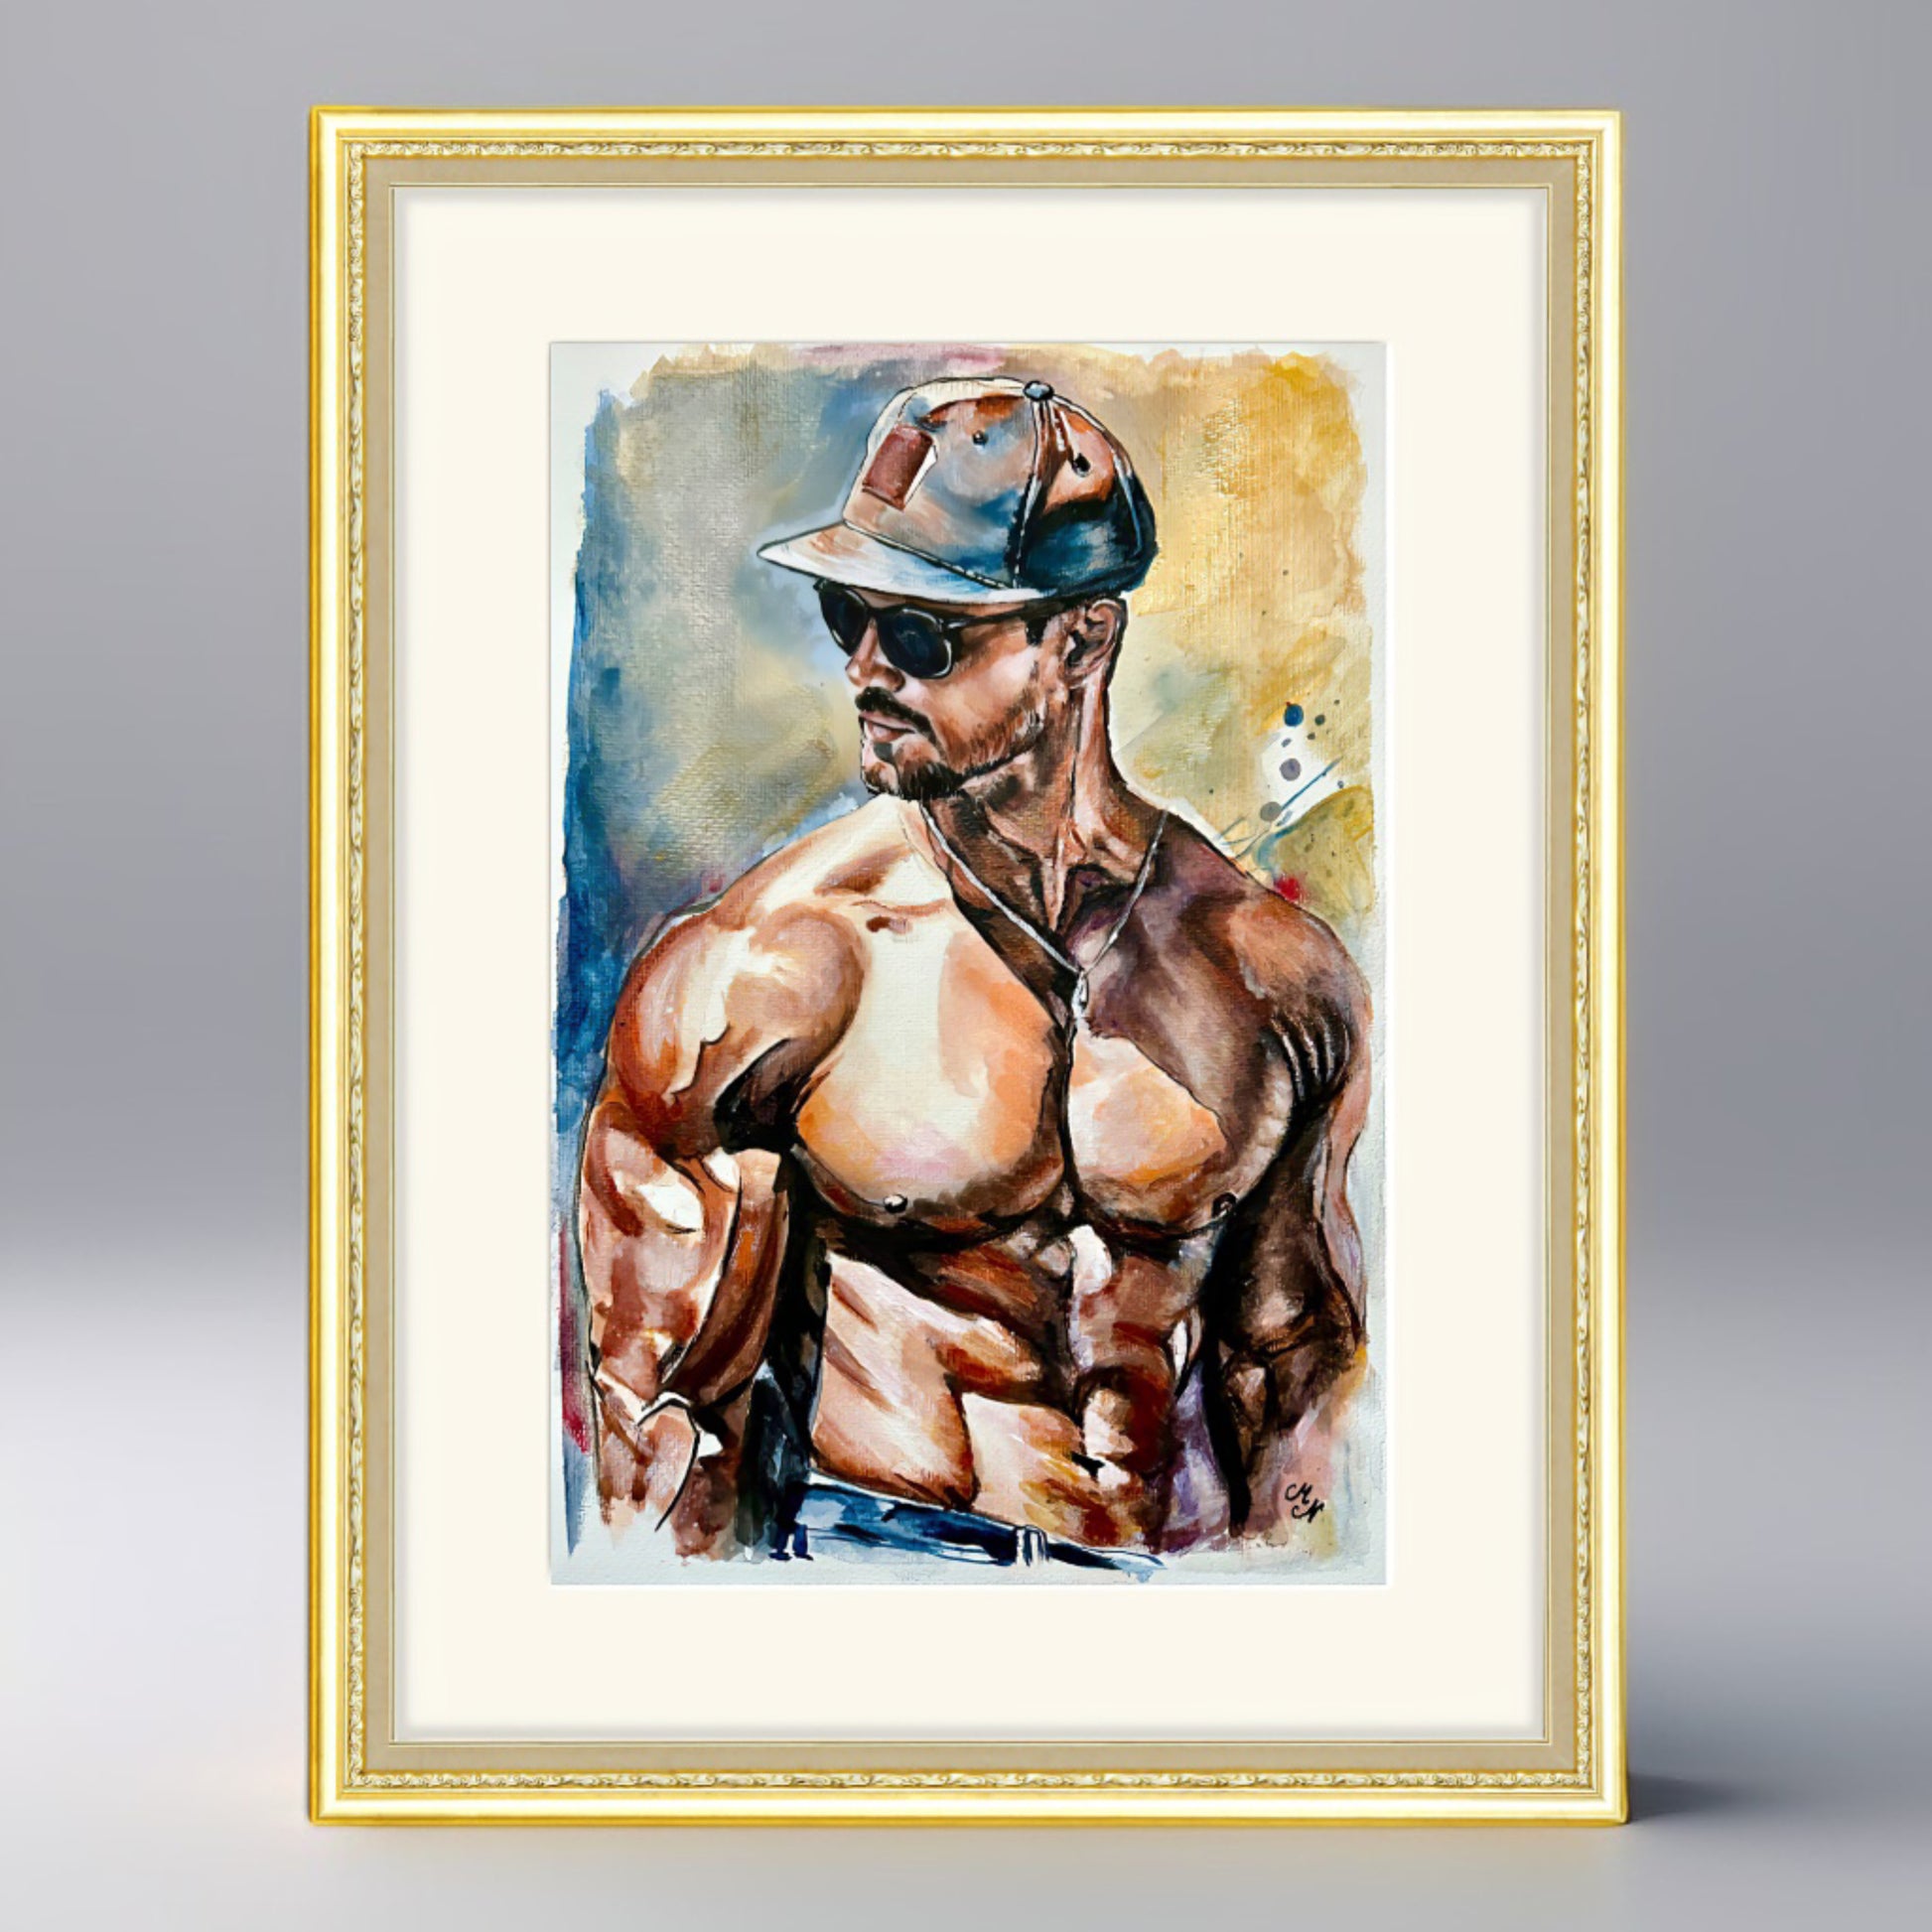 Acrylic and watercolour painting of a muscular figure